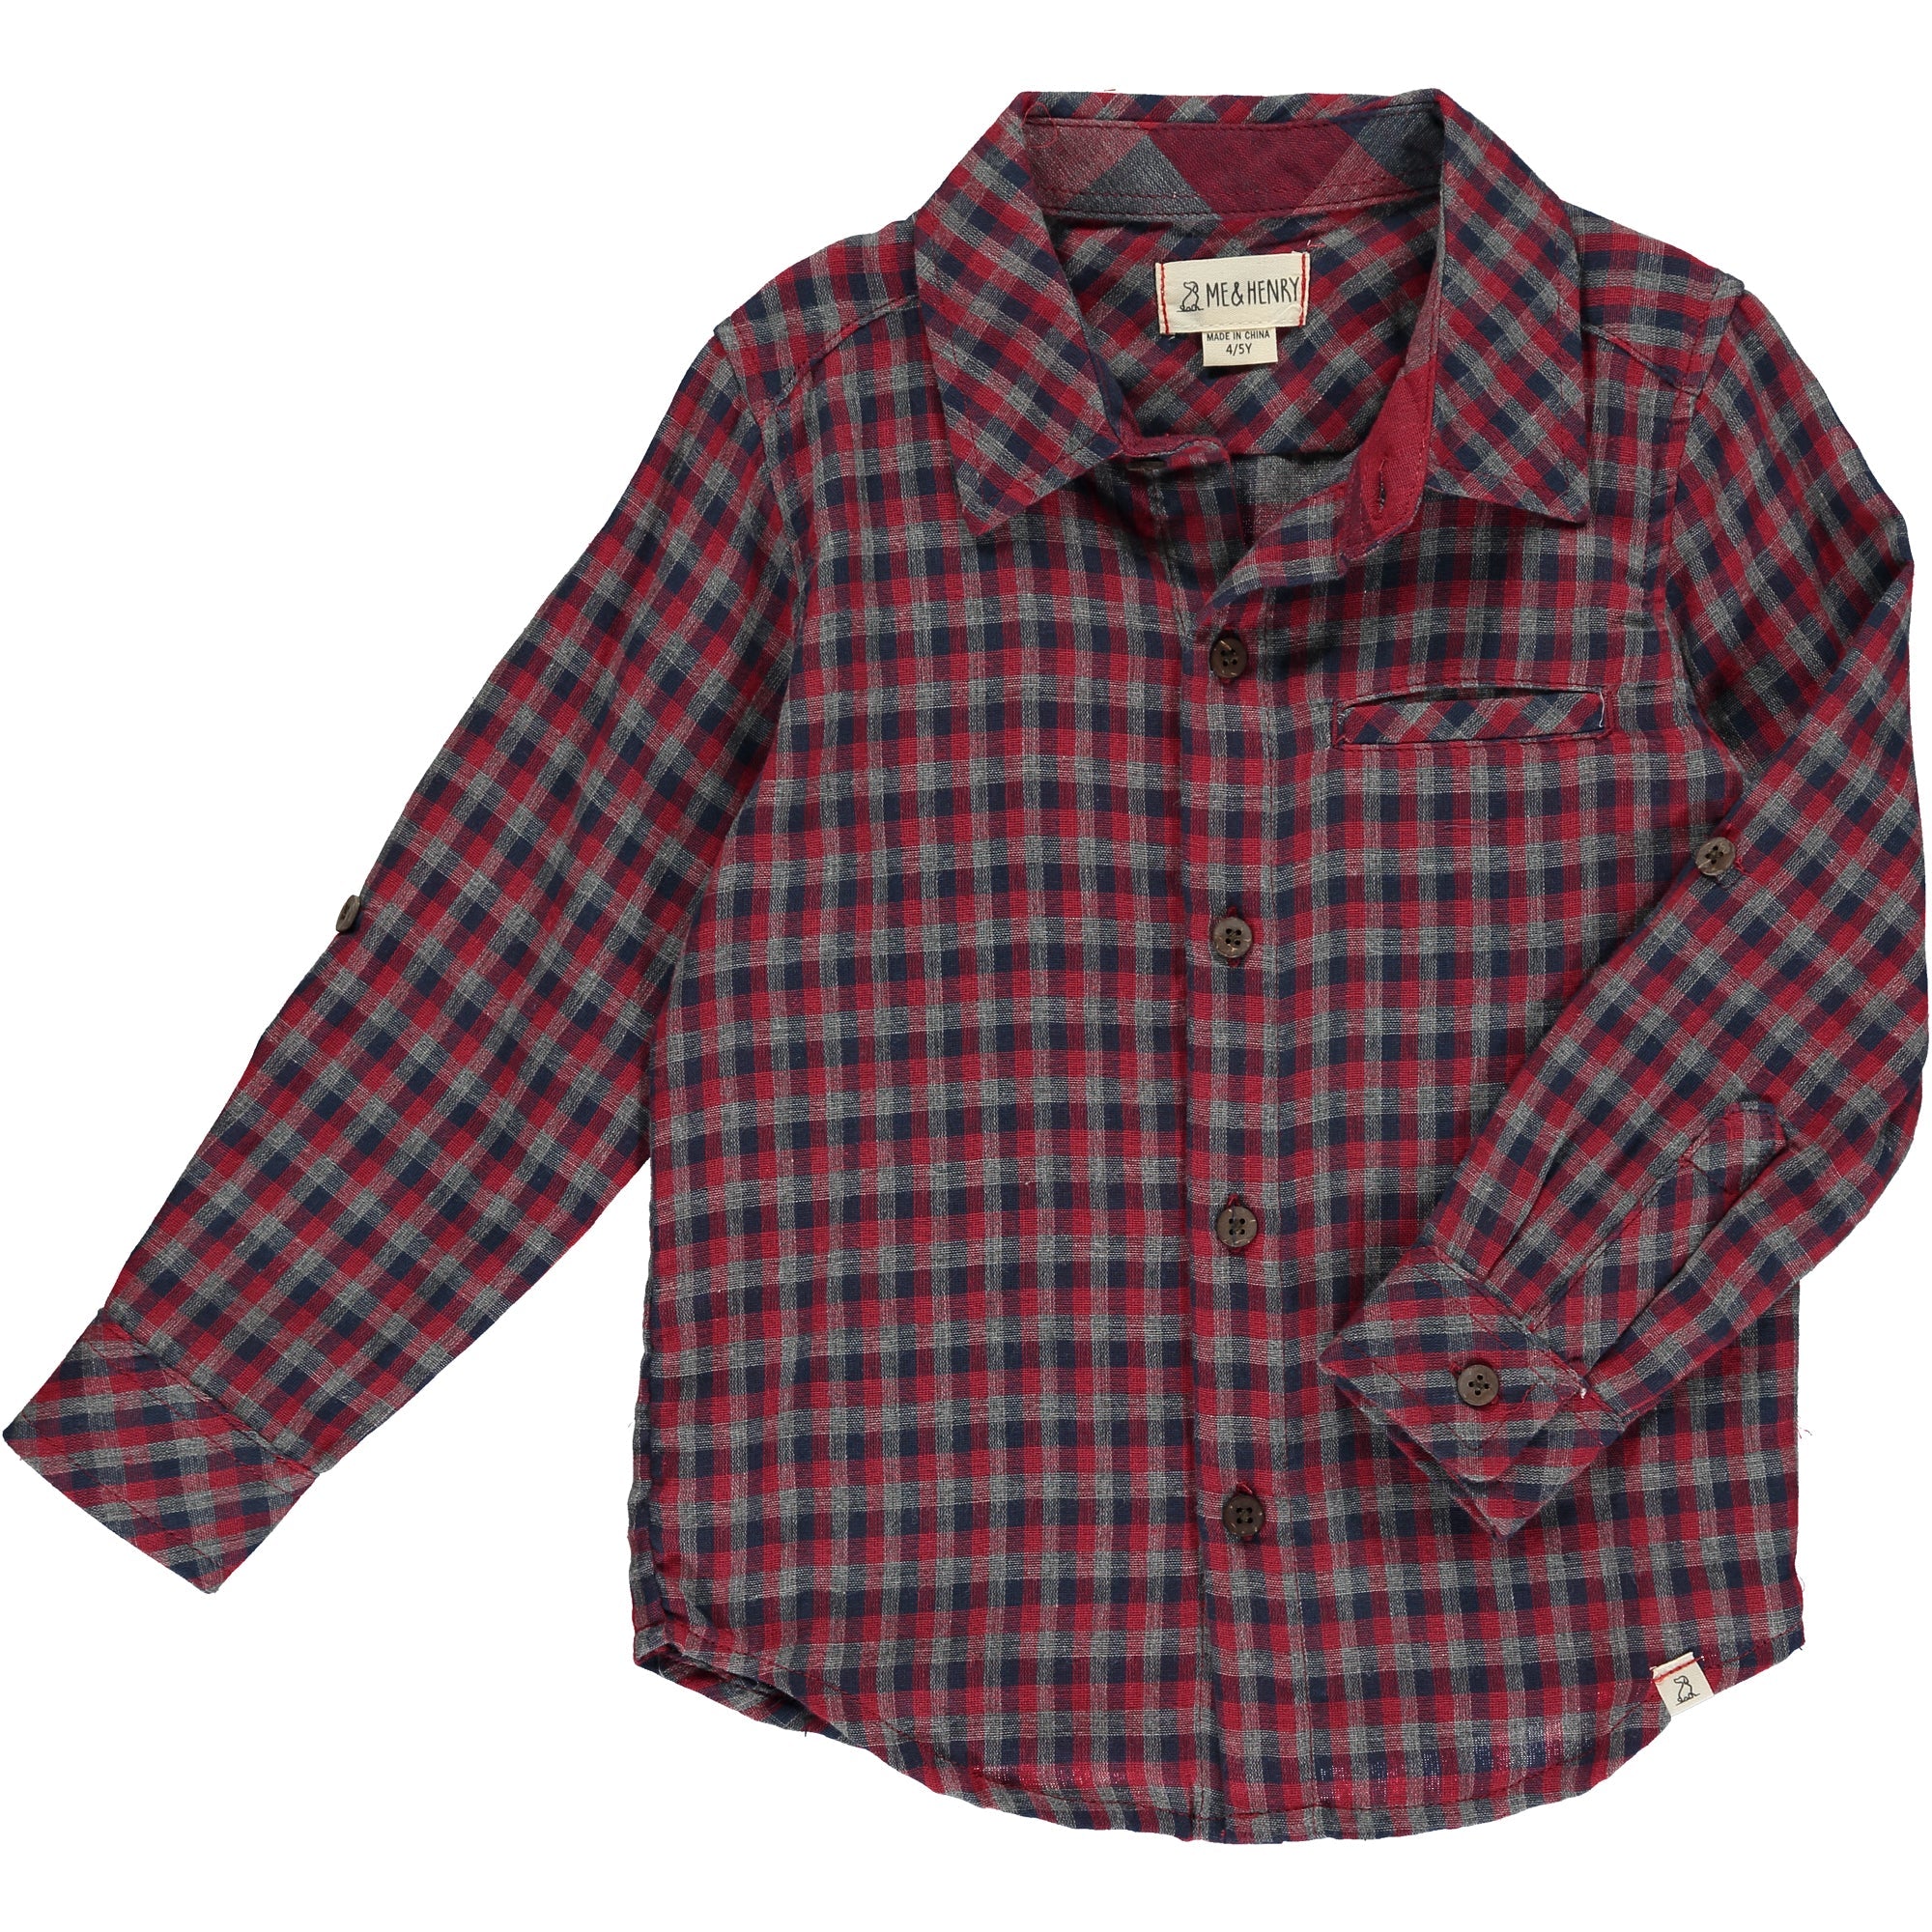 Atwood Woven Shirt - Red/Multi Plaid